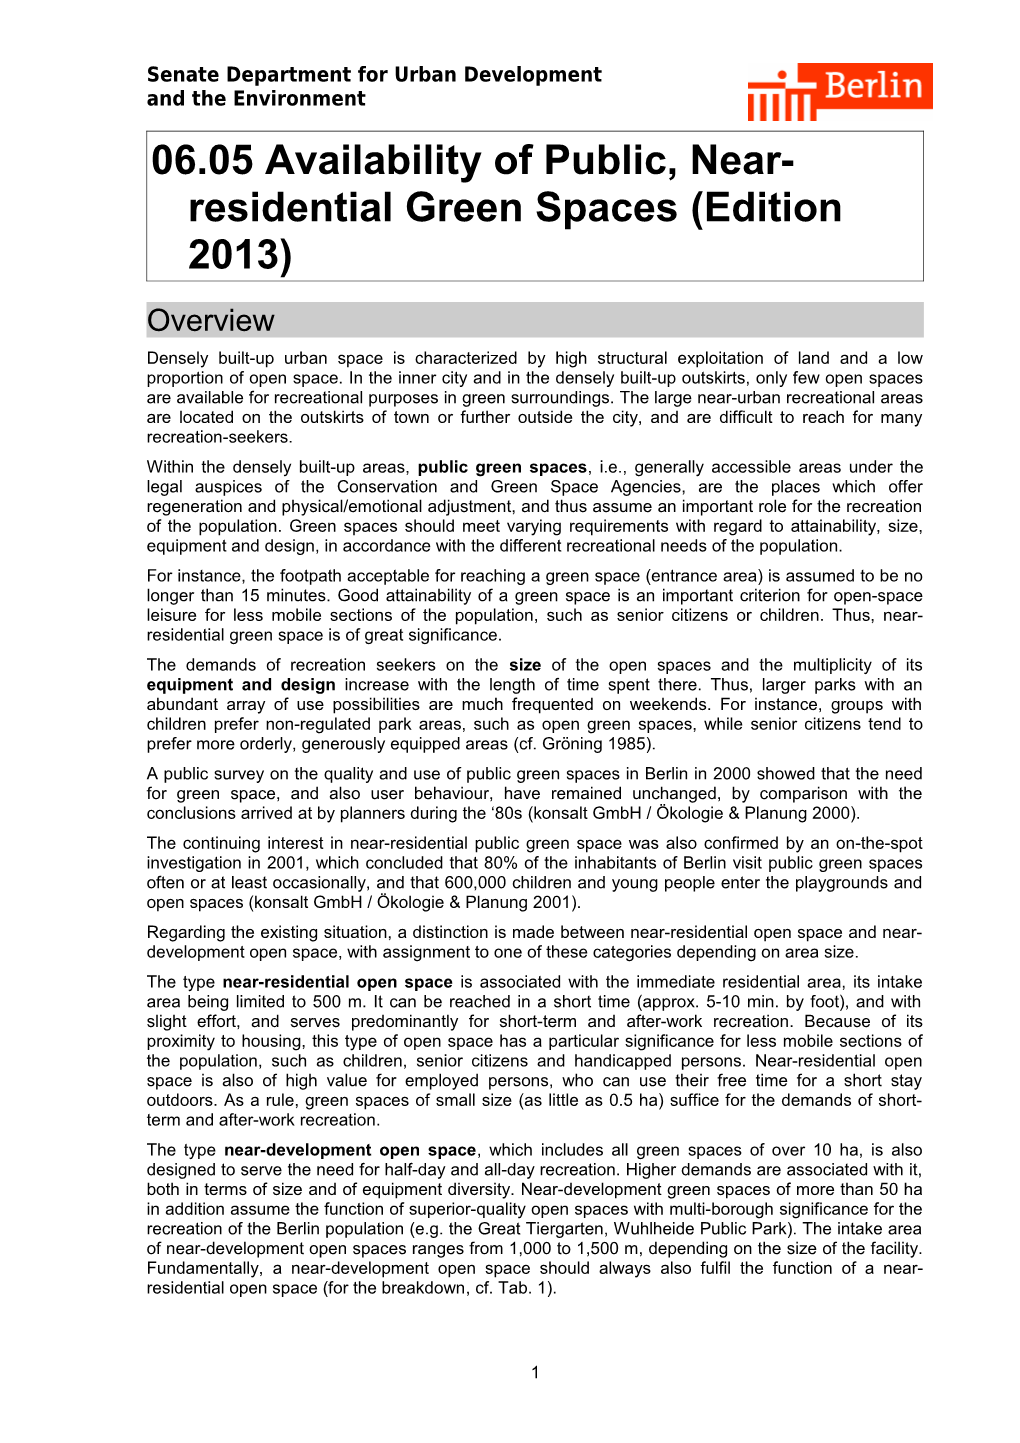 06.05 Availability of Public, Near-Residential Green Spaces (Edition 2013)